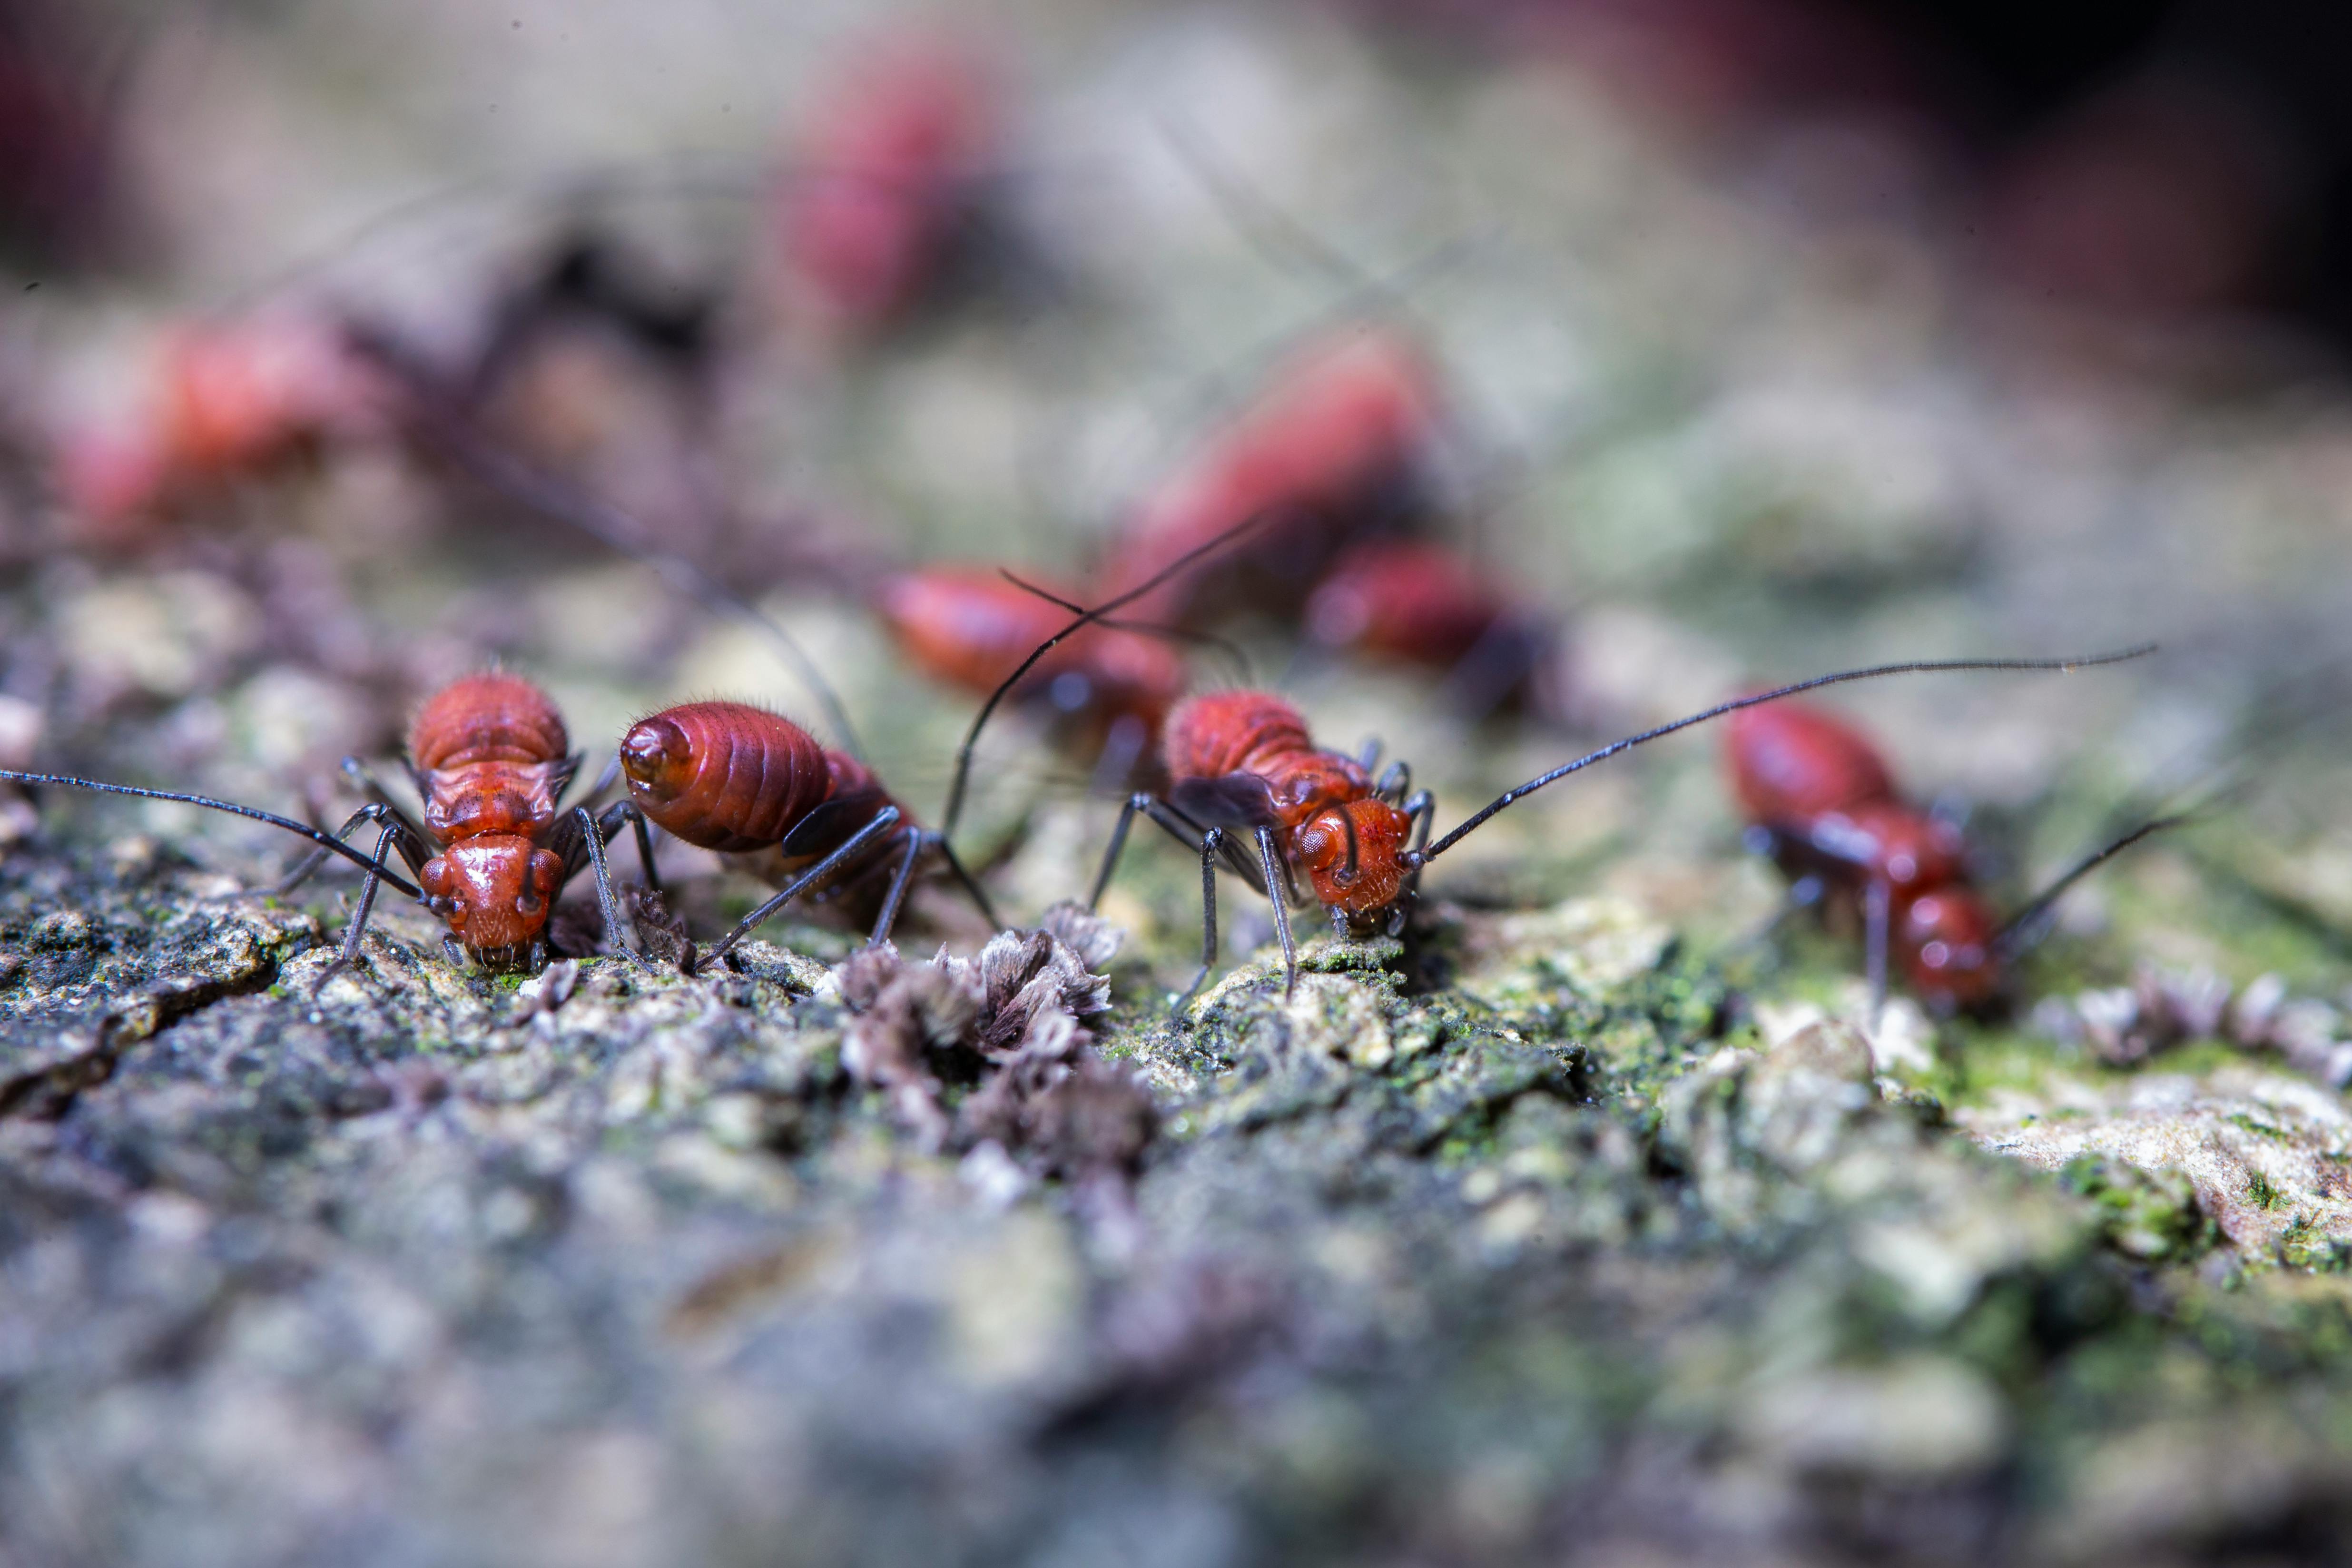 Ant Control Experts in Austin, TX